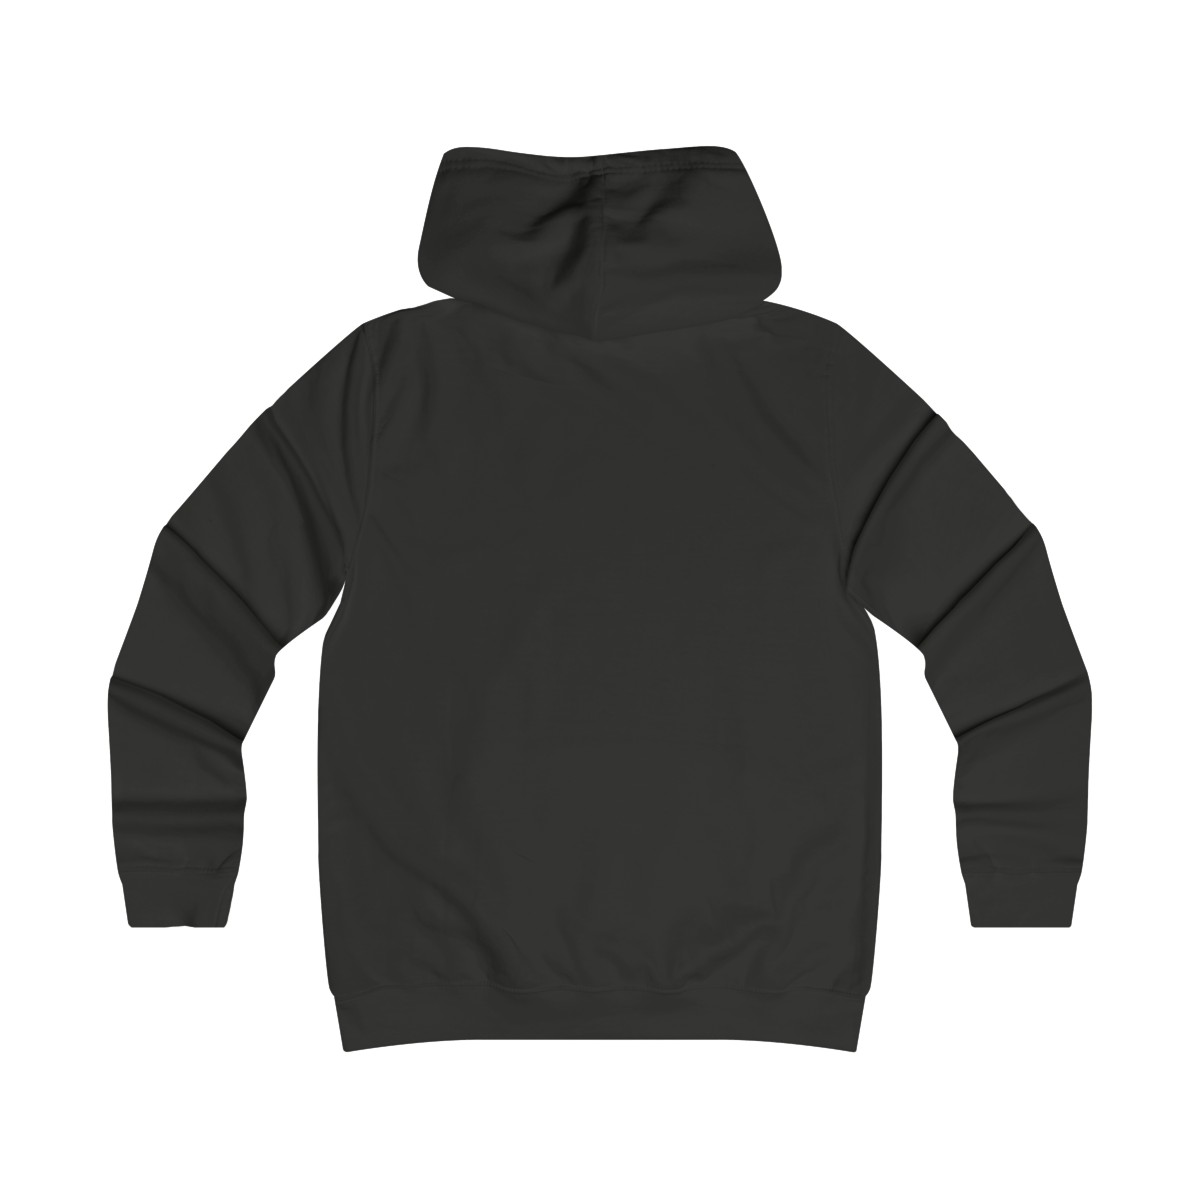 Women's College Hoodie product thumbnail image